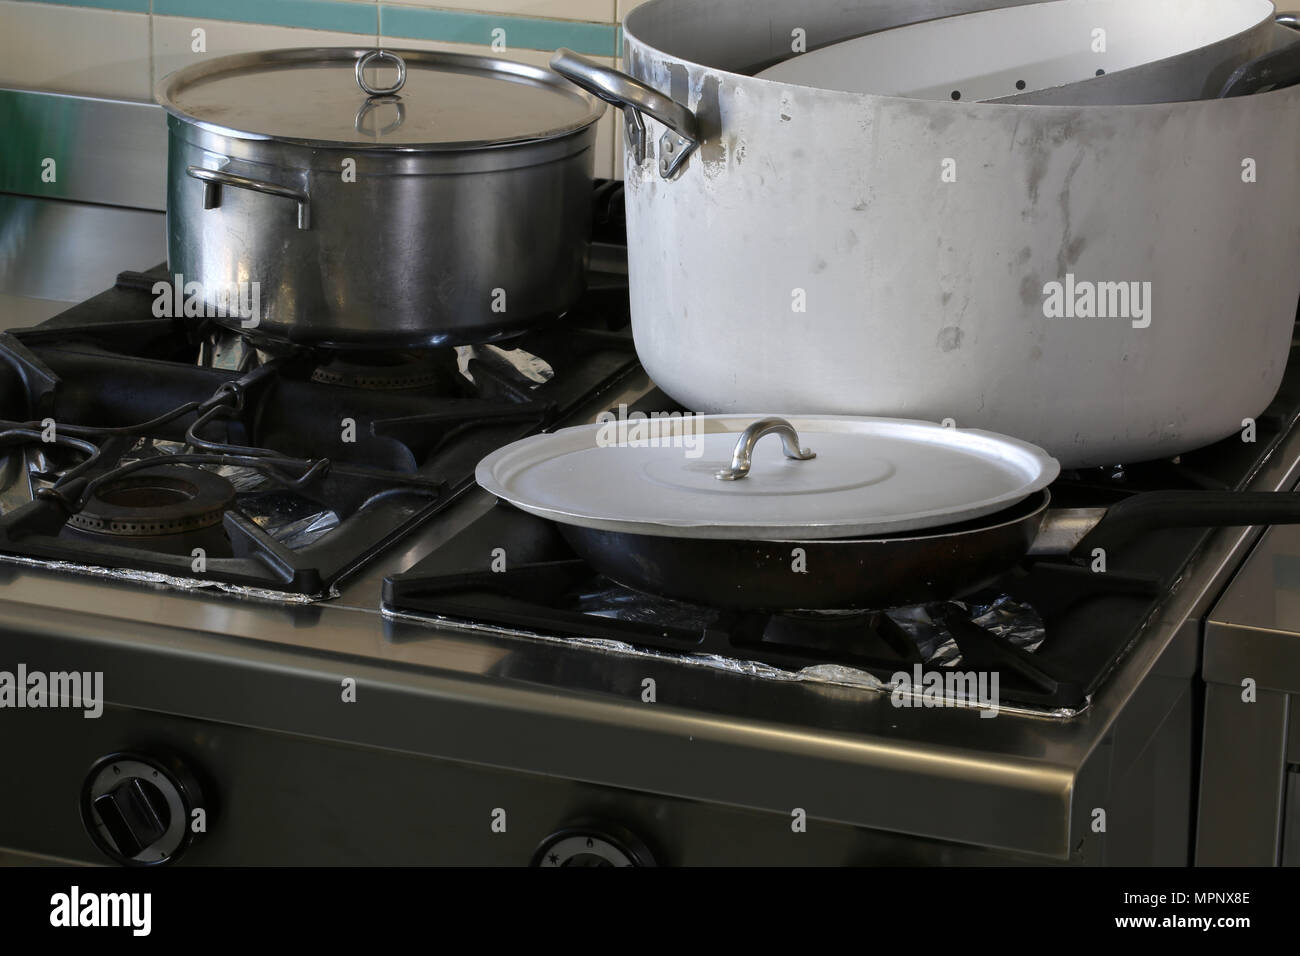 https://c8.alamy.com/comp/MPNX8E/large-industrial-cooker-of-a-kitchen-of-a-restaurant-with-gigantic-pots-and-lids-MPNX8E.jpg